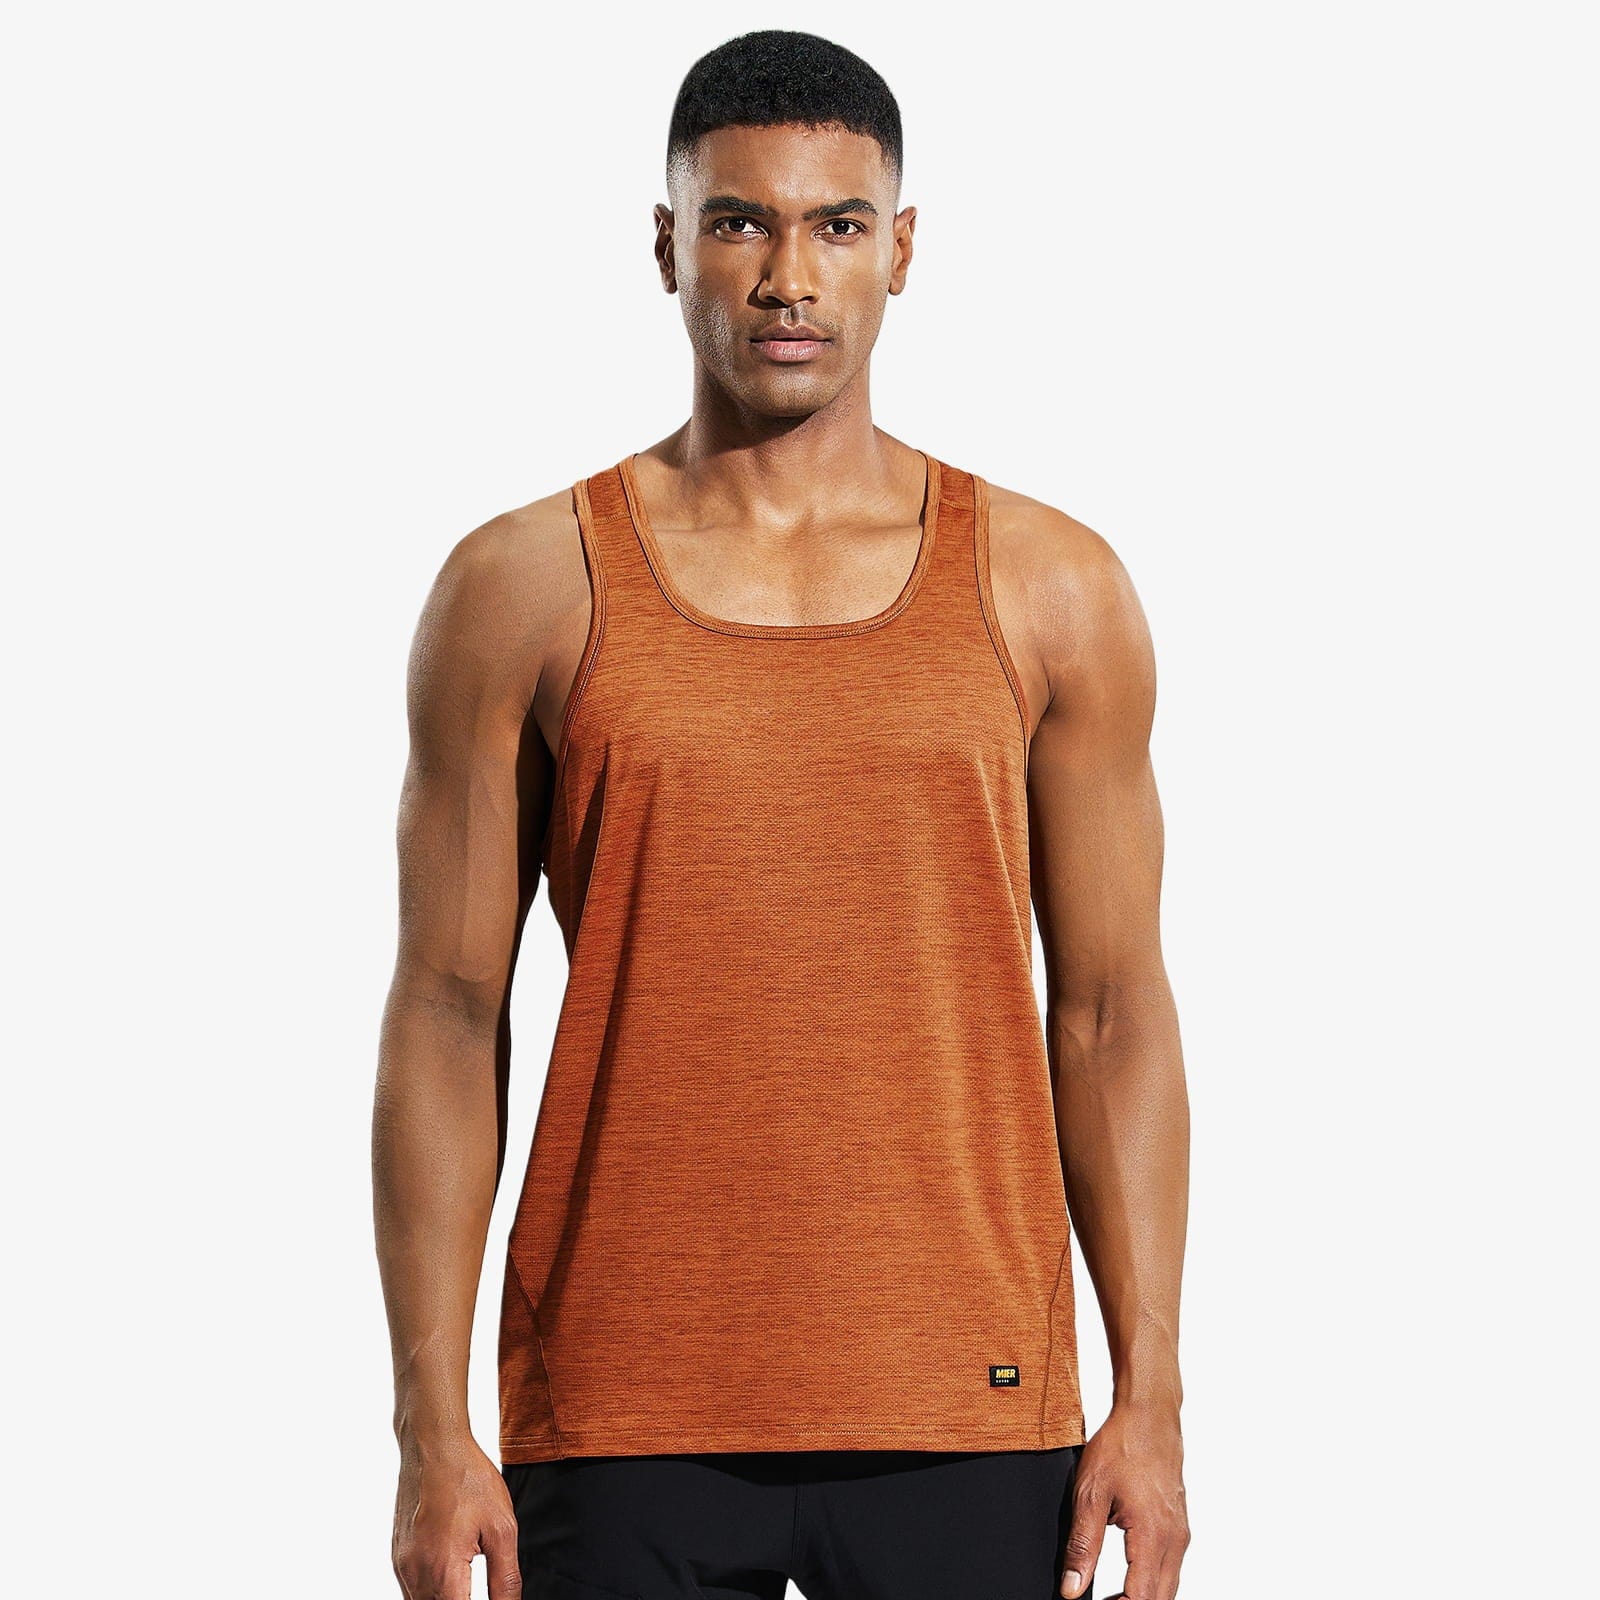 Men's Sleeveless Workout Shirts Quick Dry Athletic Tanks - Heather Brown / S